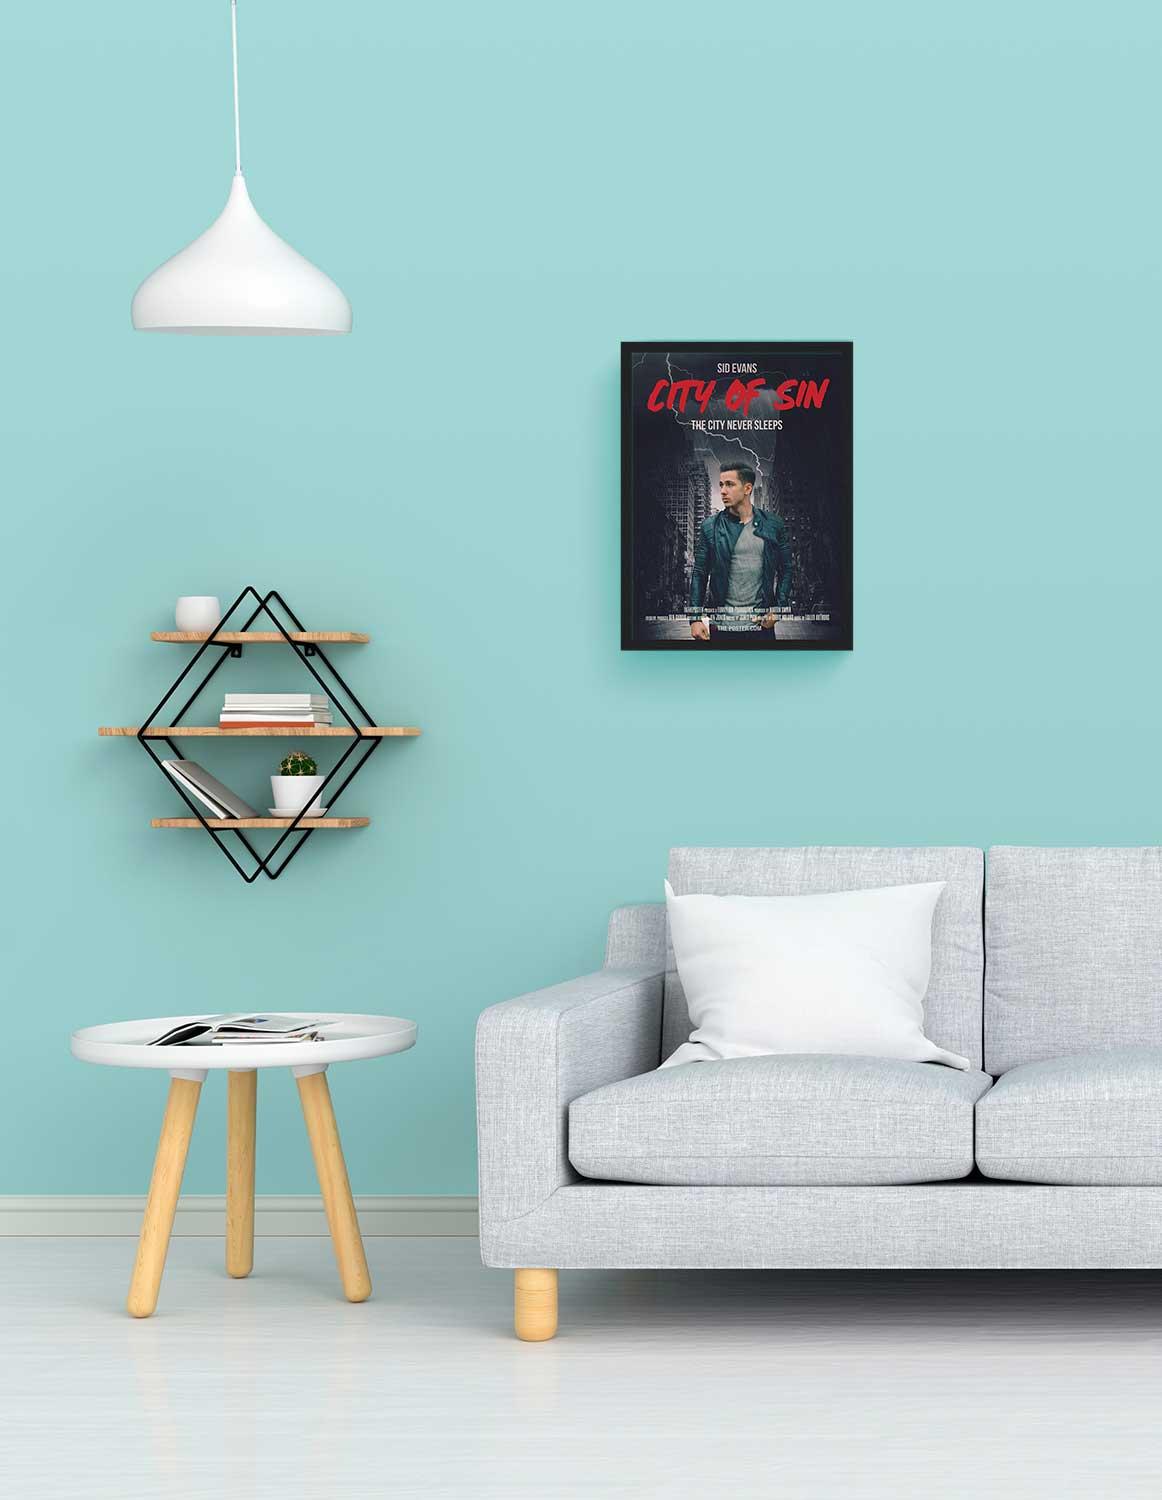 A personalized film noir movie poster in small size in a black frame above a grey sofa